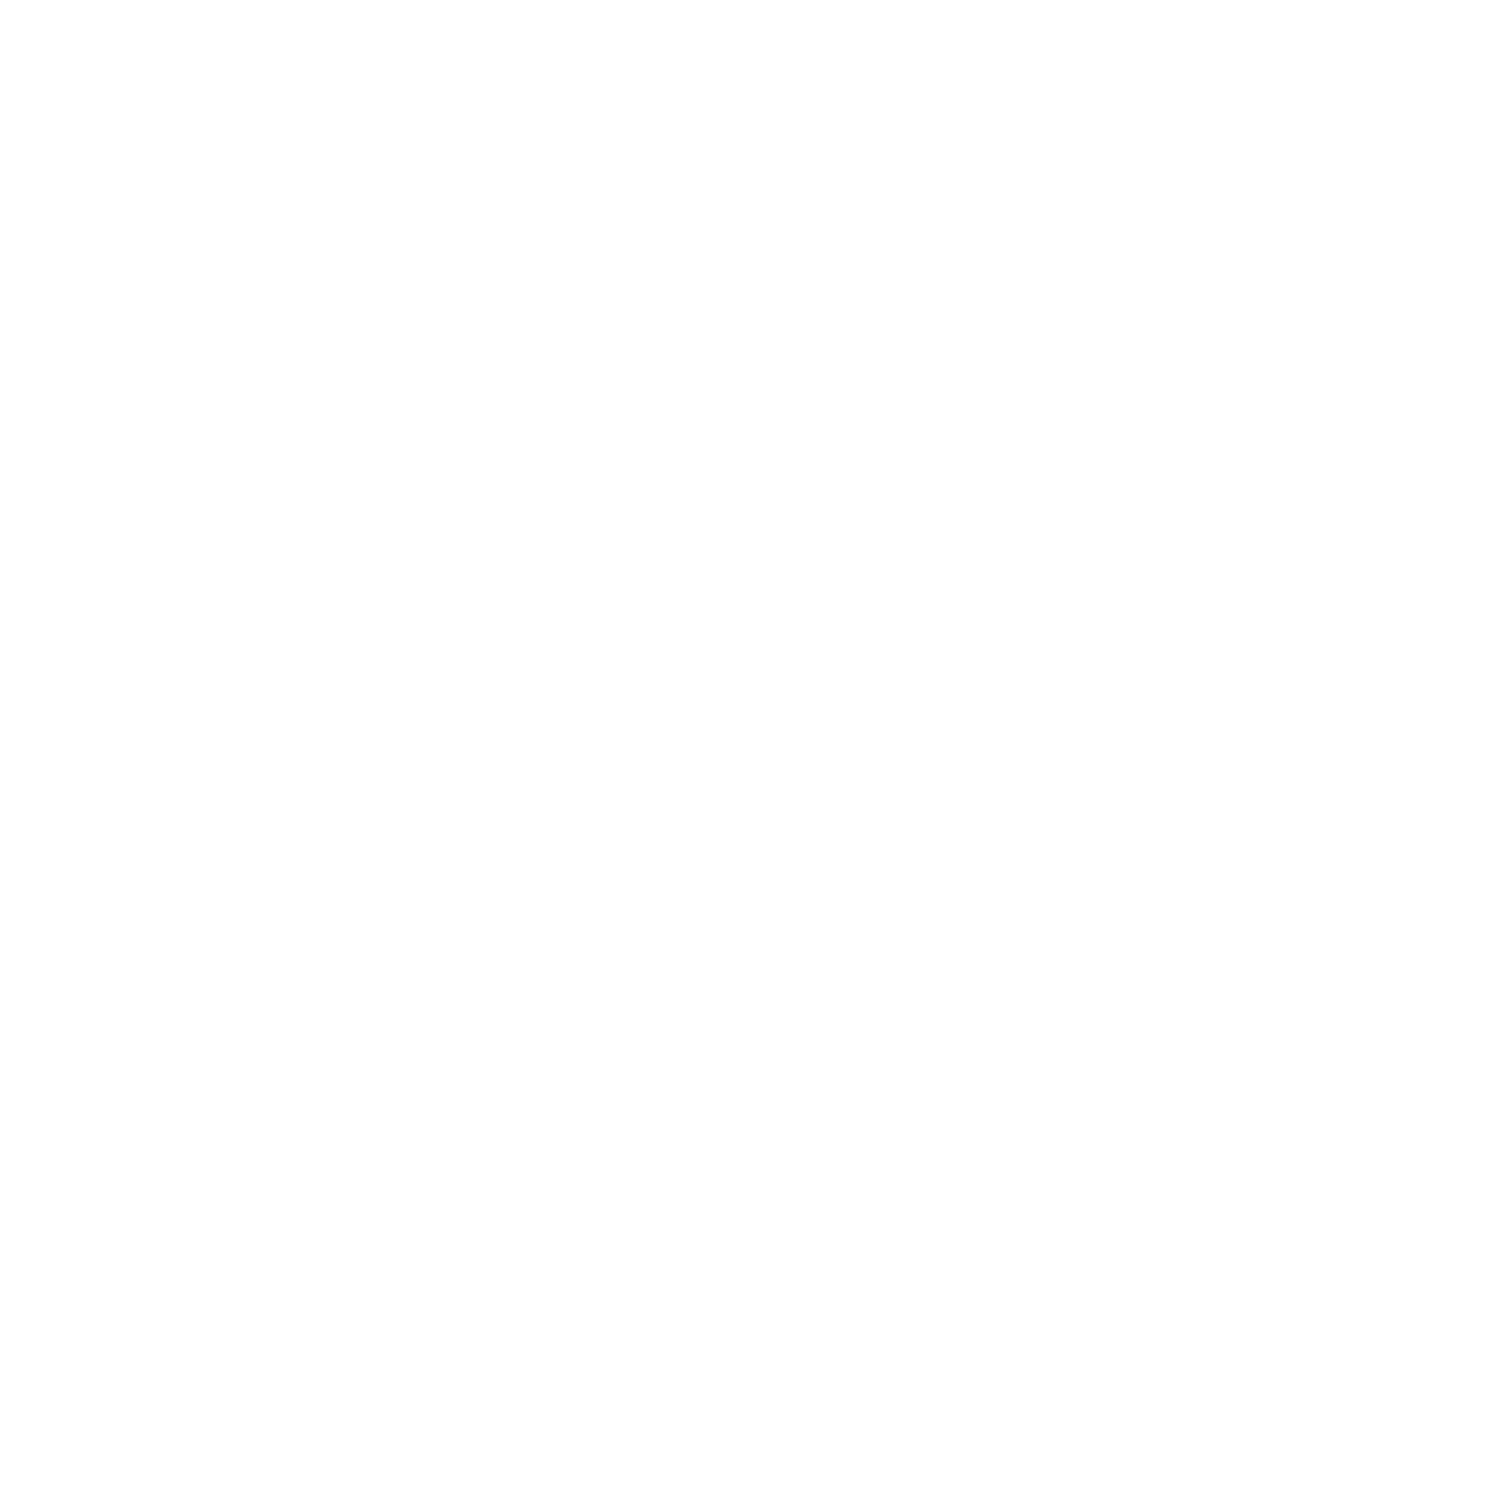 KEE OYSTER HOUSE